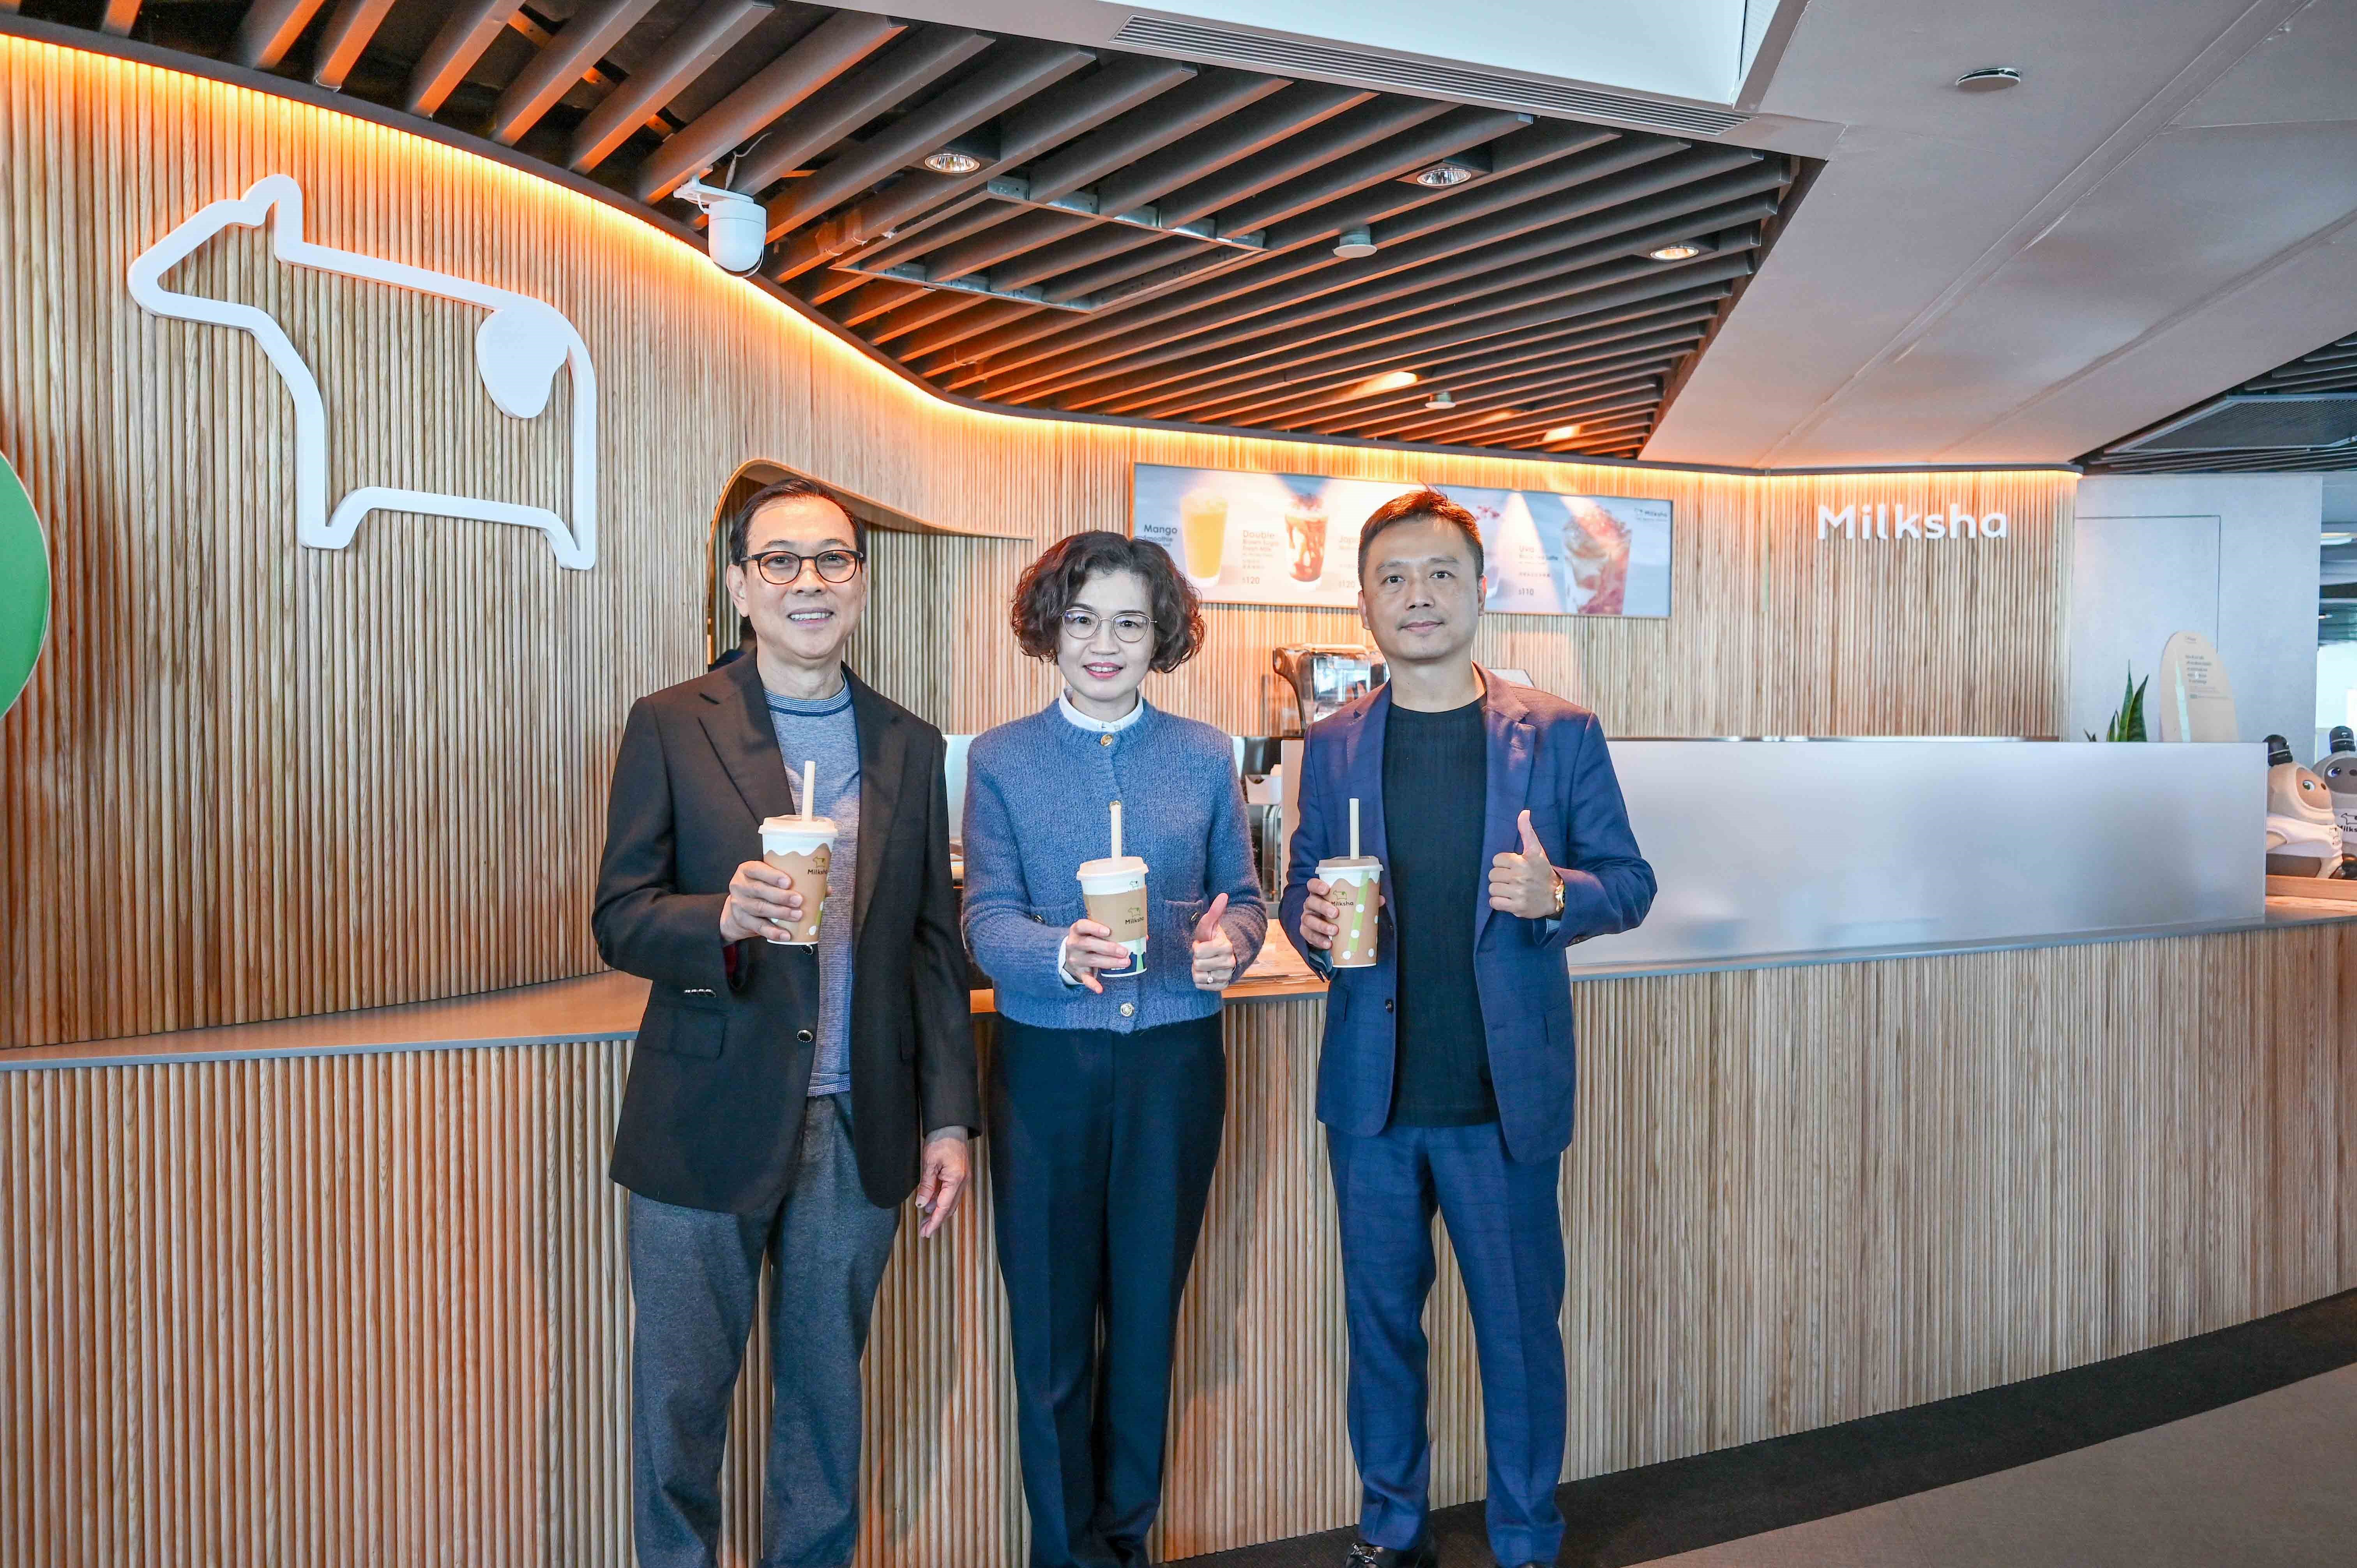 (From left) Tony Tan Caktiong, Founder and Chairman of Jollibee Foods Corporation; Lillian Chu, President & Chief Operation Officer of TAIPEI 101; Peter Huang, General Manager of Milksha